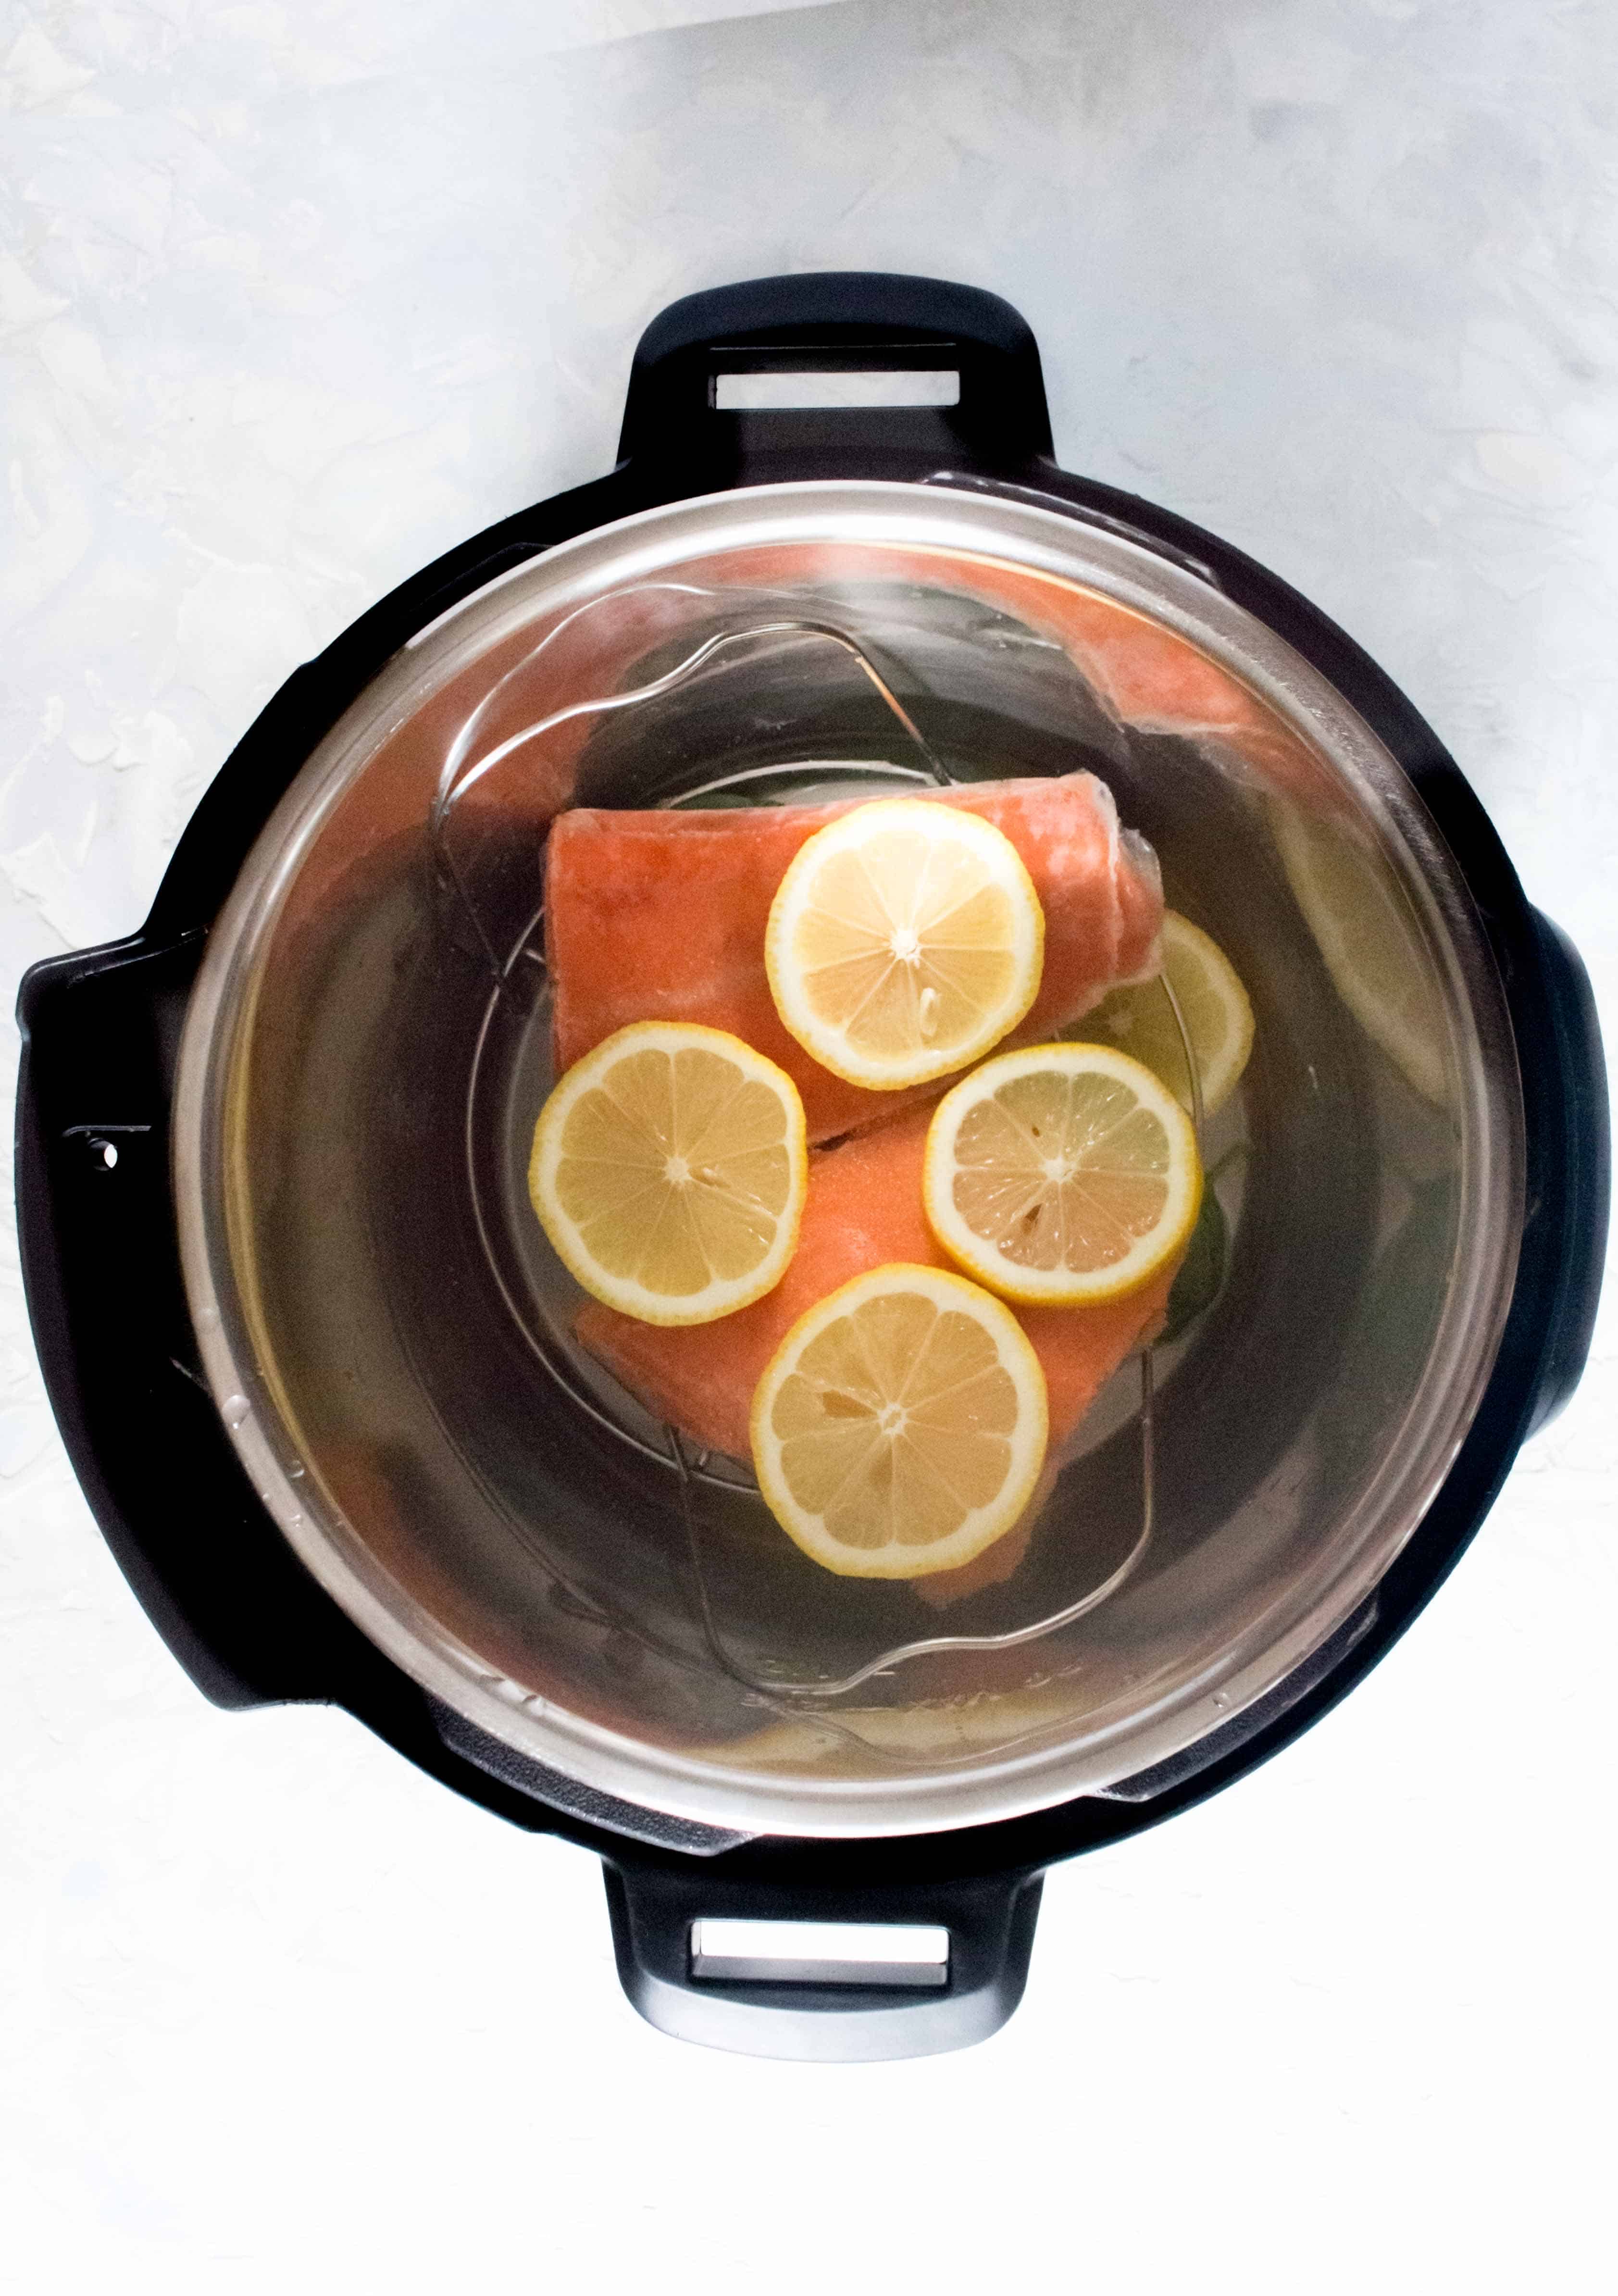 How to Make Frozen Salmon in the Instant Pot